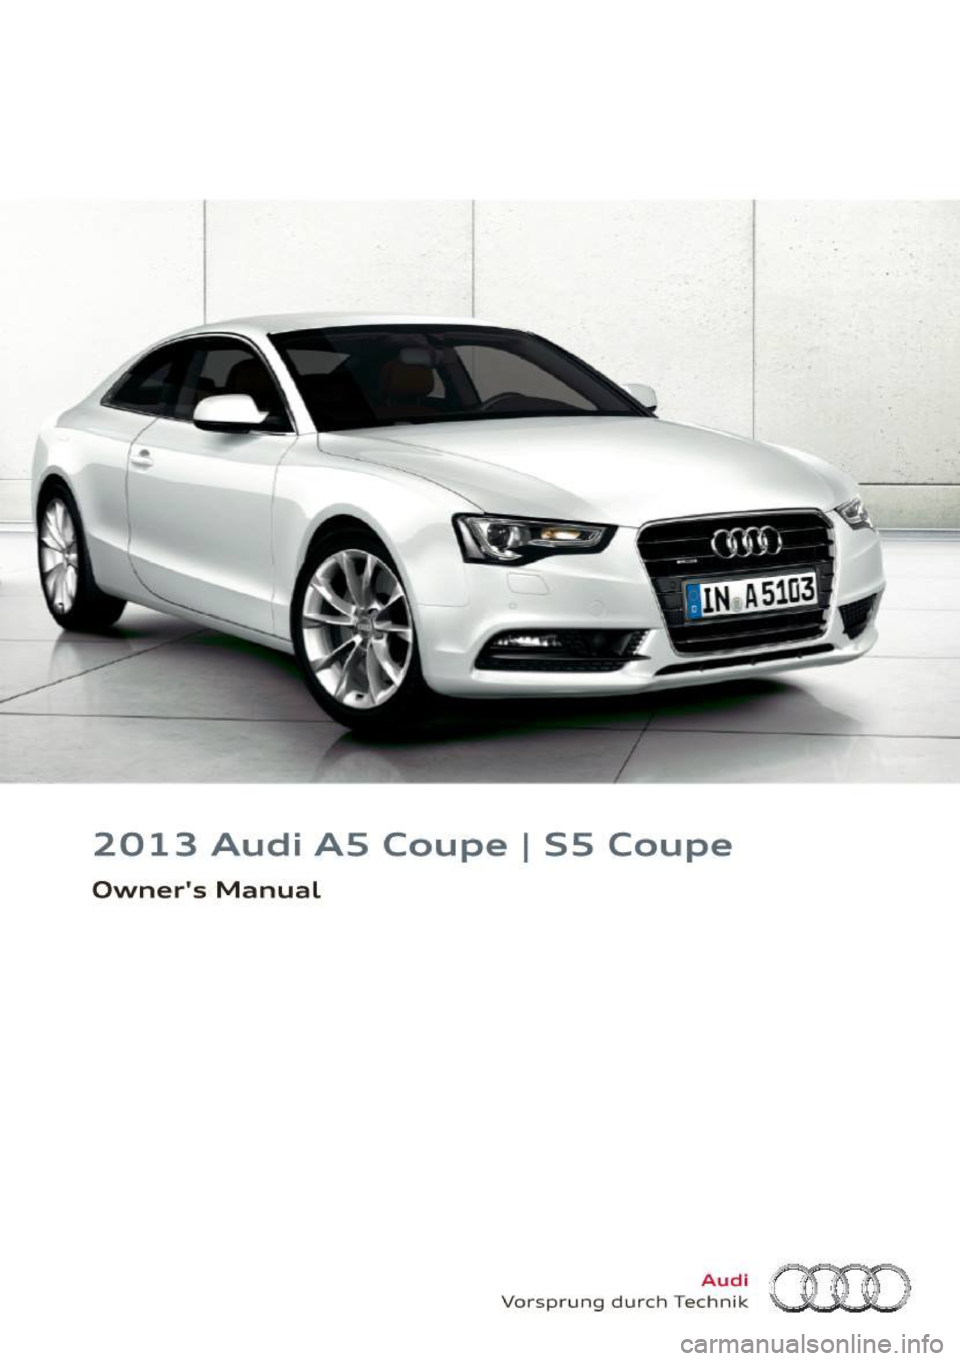 AUDI A5 COUPE 2013  Owners Manual 2013  Audi  AS  Coupe I 55  Coupe 
Owners  Manual 
Audi 
Vo rspr ung  du rch  Techn ik (HO  